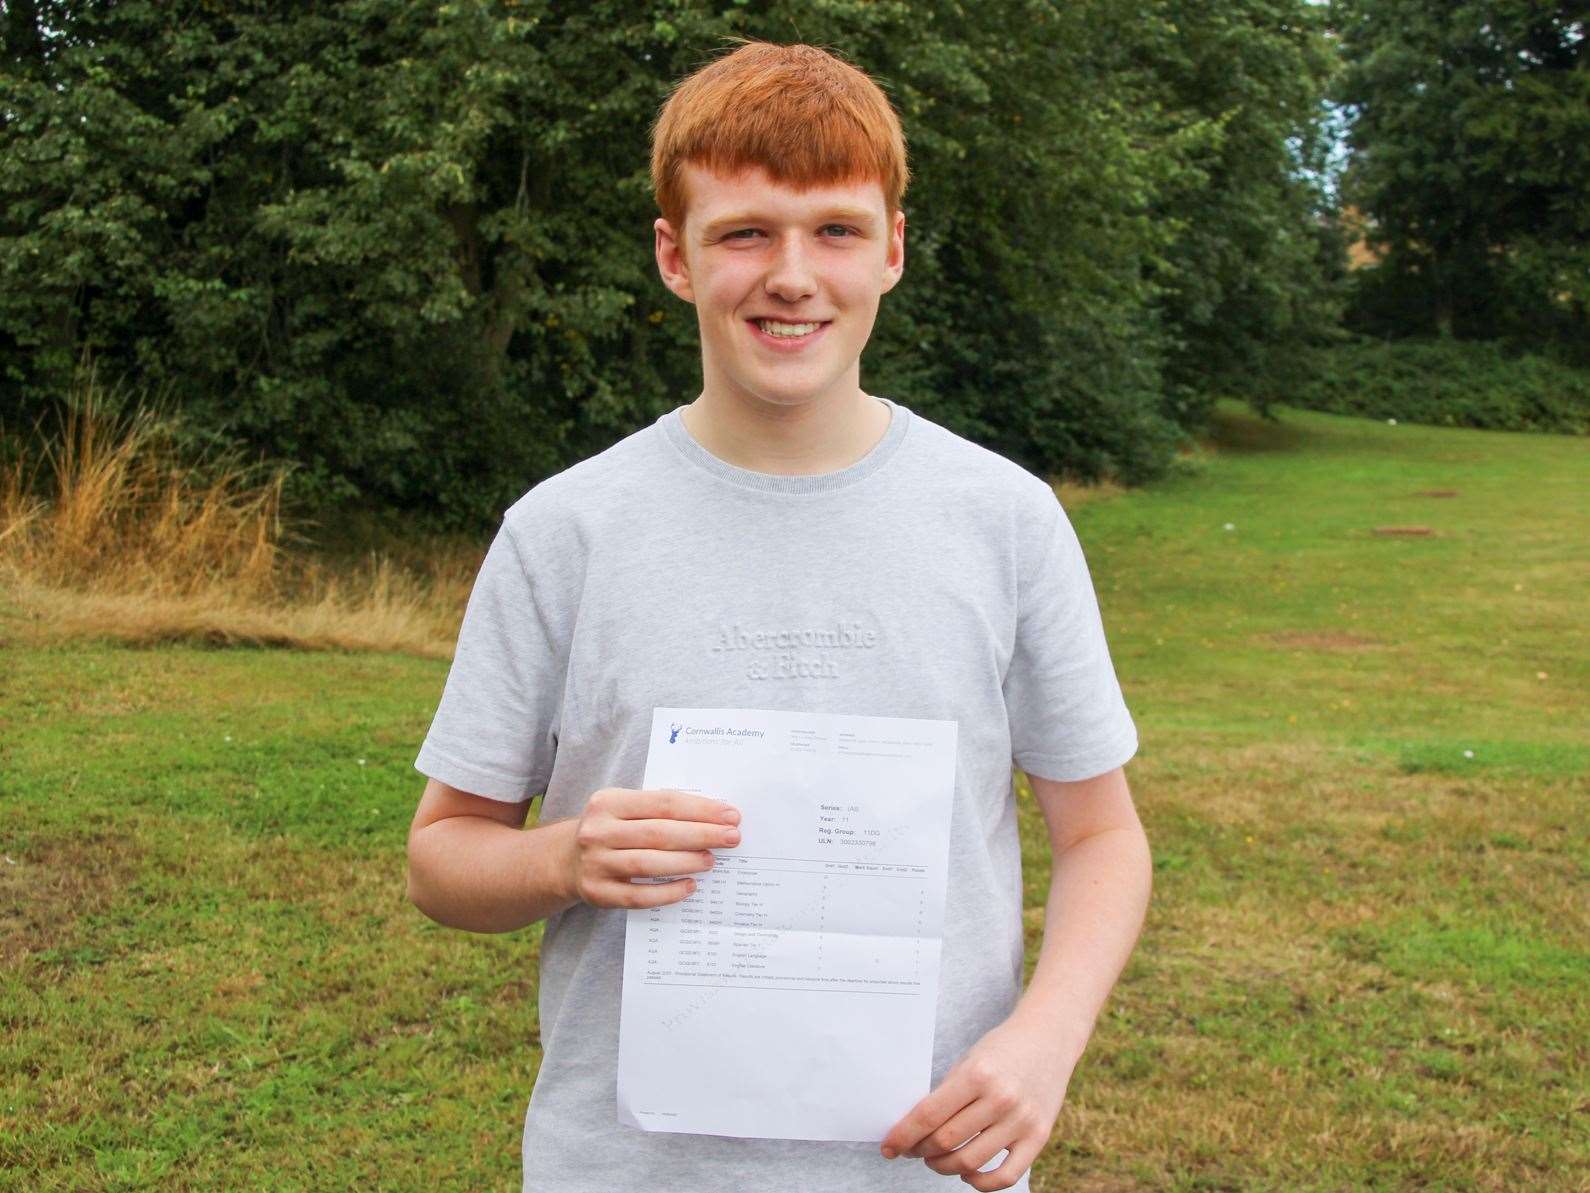 Cornwallis Academy pupil Luke Elston secured two 9s, one 8, three 7s, one 6 and one 5